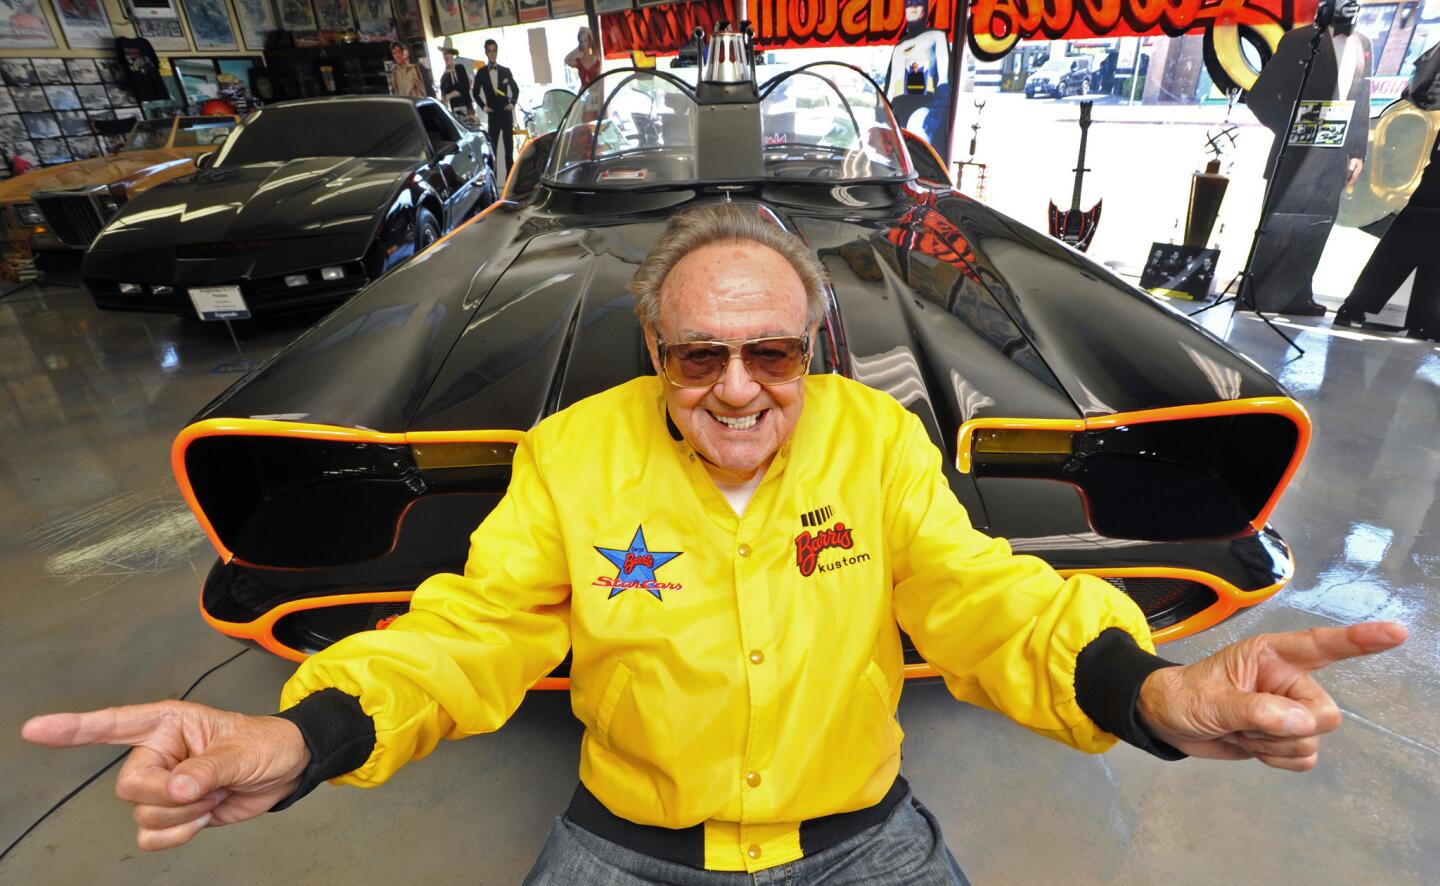 George Barris, who designed the iconic Batmobile for the 1960's TV show, will receive a lifetime achievement award at the Downtown Burbank Car Classic on Saturday. Photographed at his North Hollywood shop on Thursday, July 25, 2013.